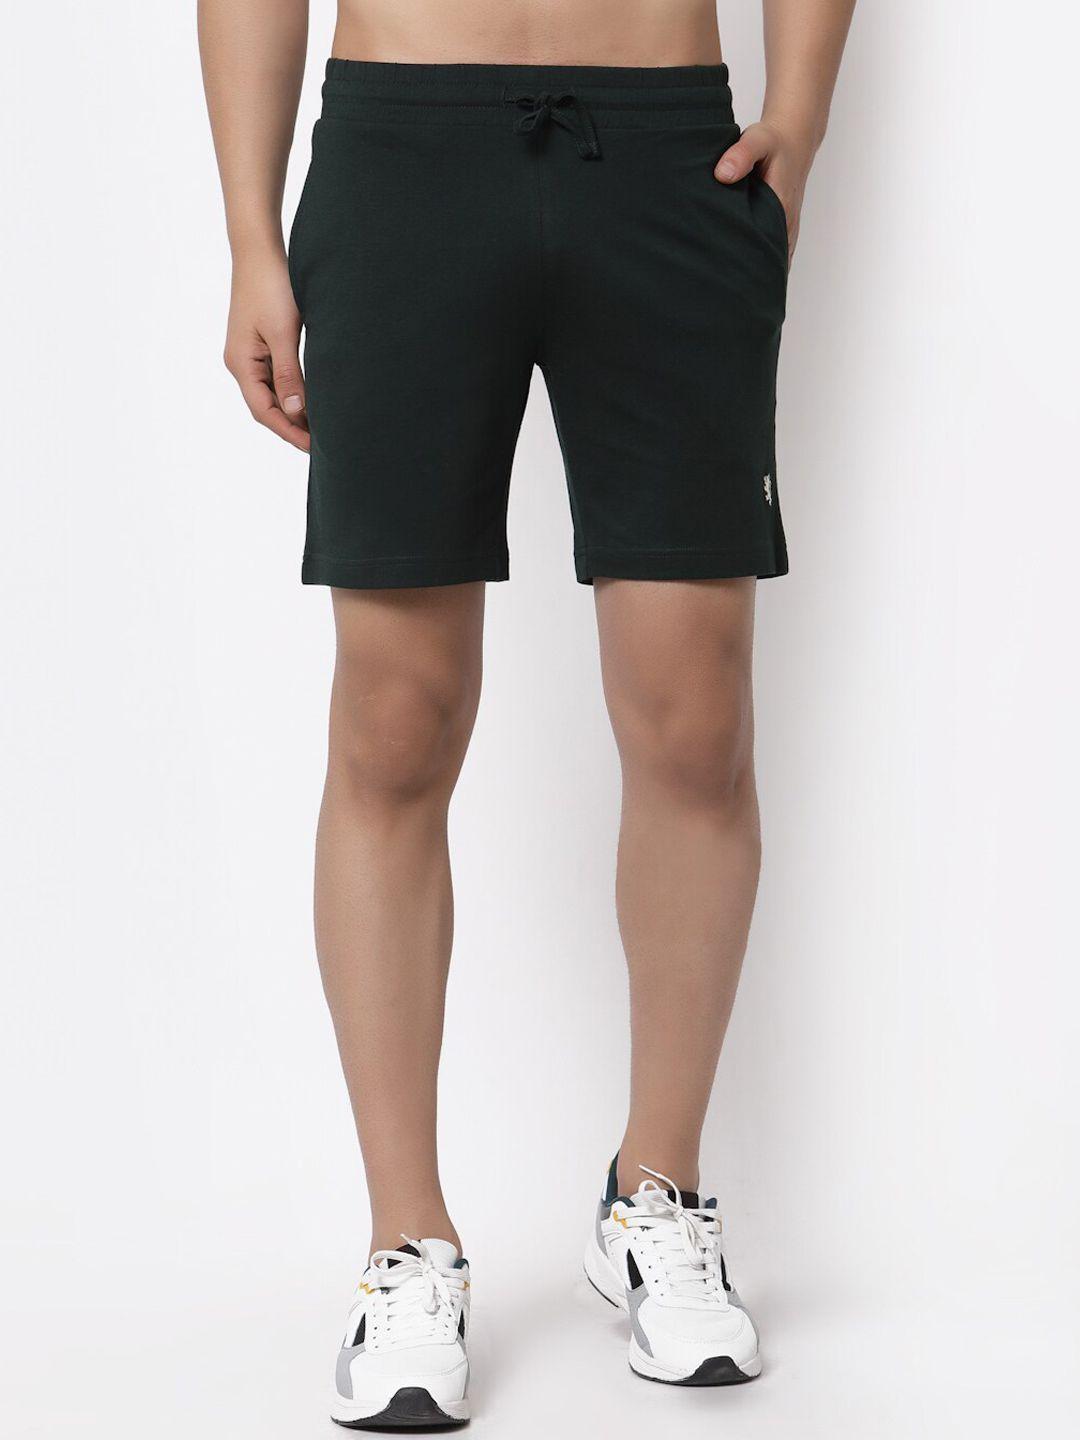 red tape men green regular fit outdoor sports cotton shorts